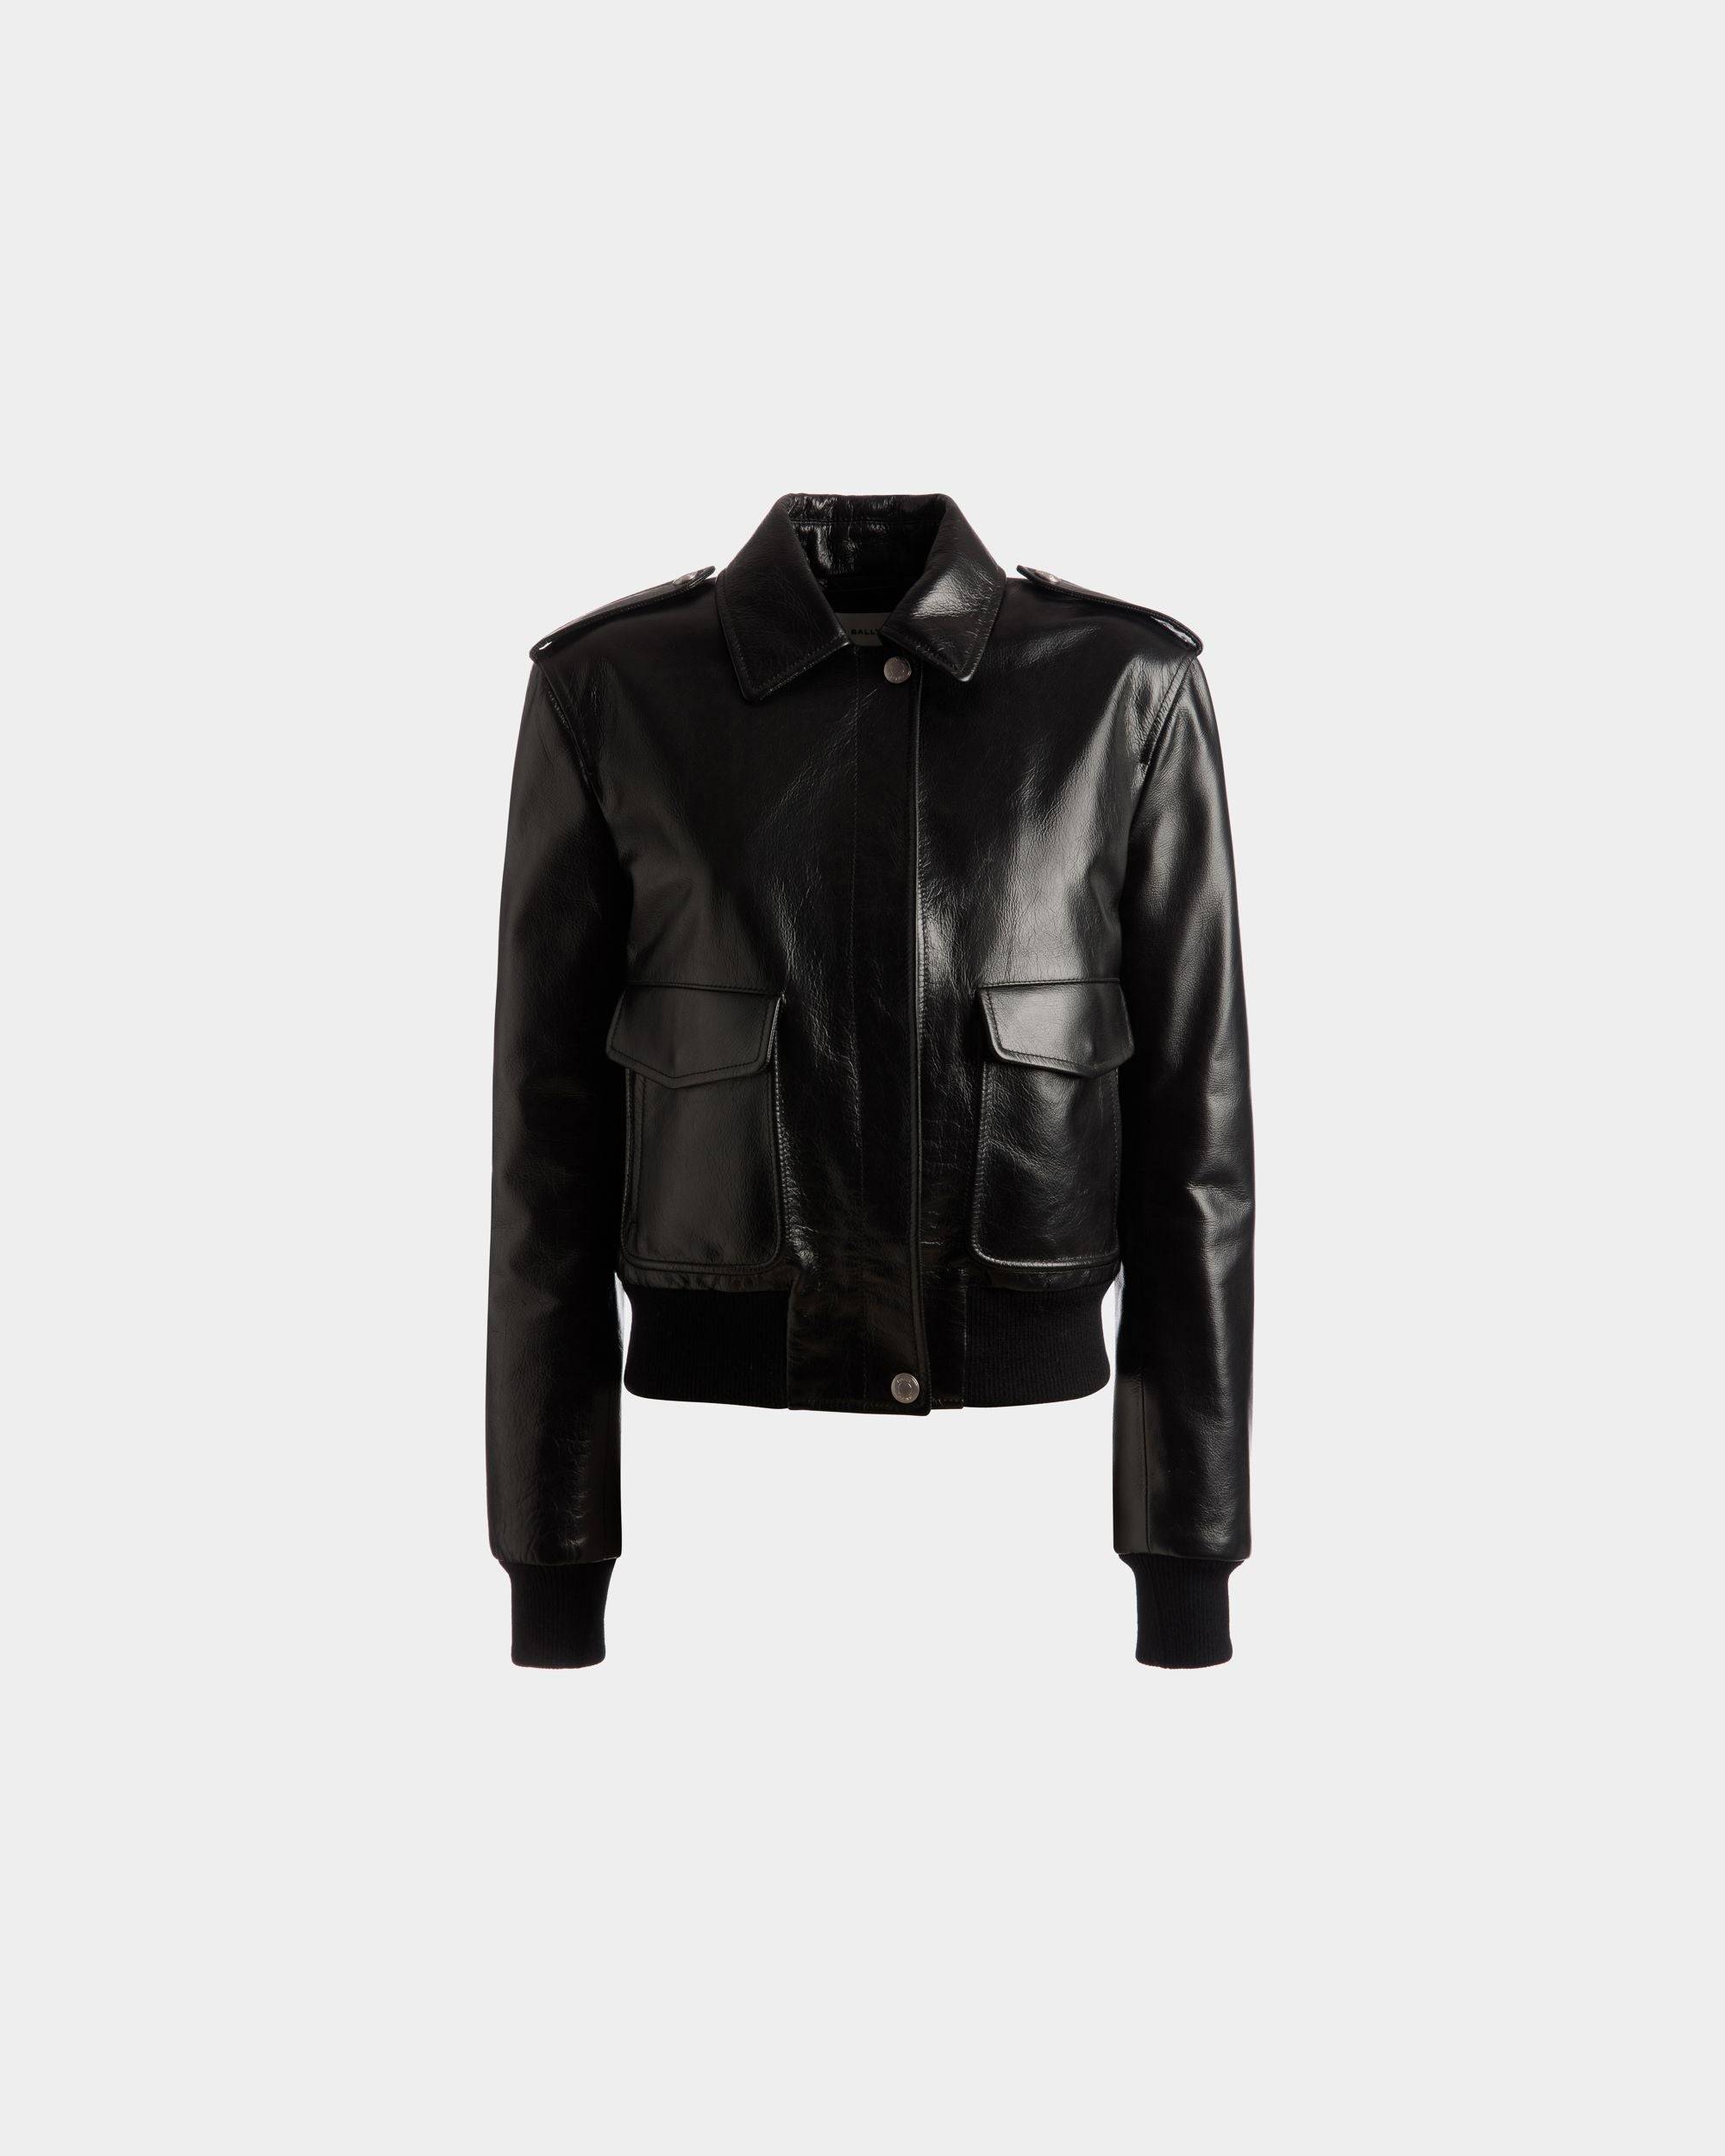 Women's Bomber Jacket In Black Leather | Bally | Still Life Front